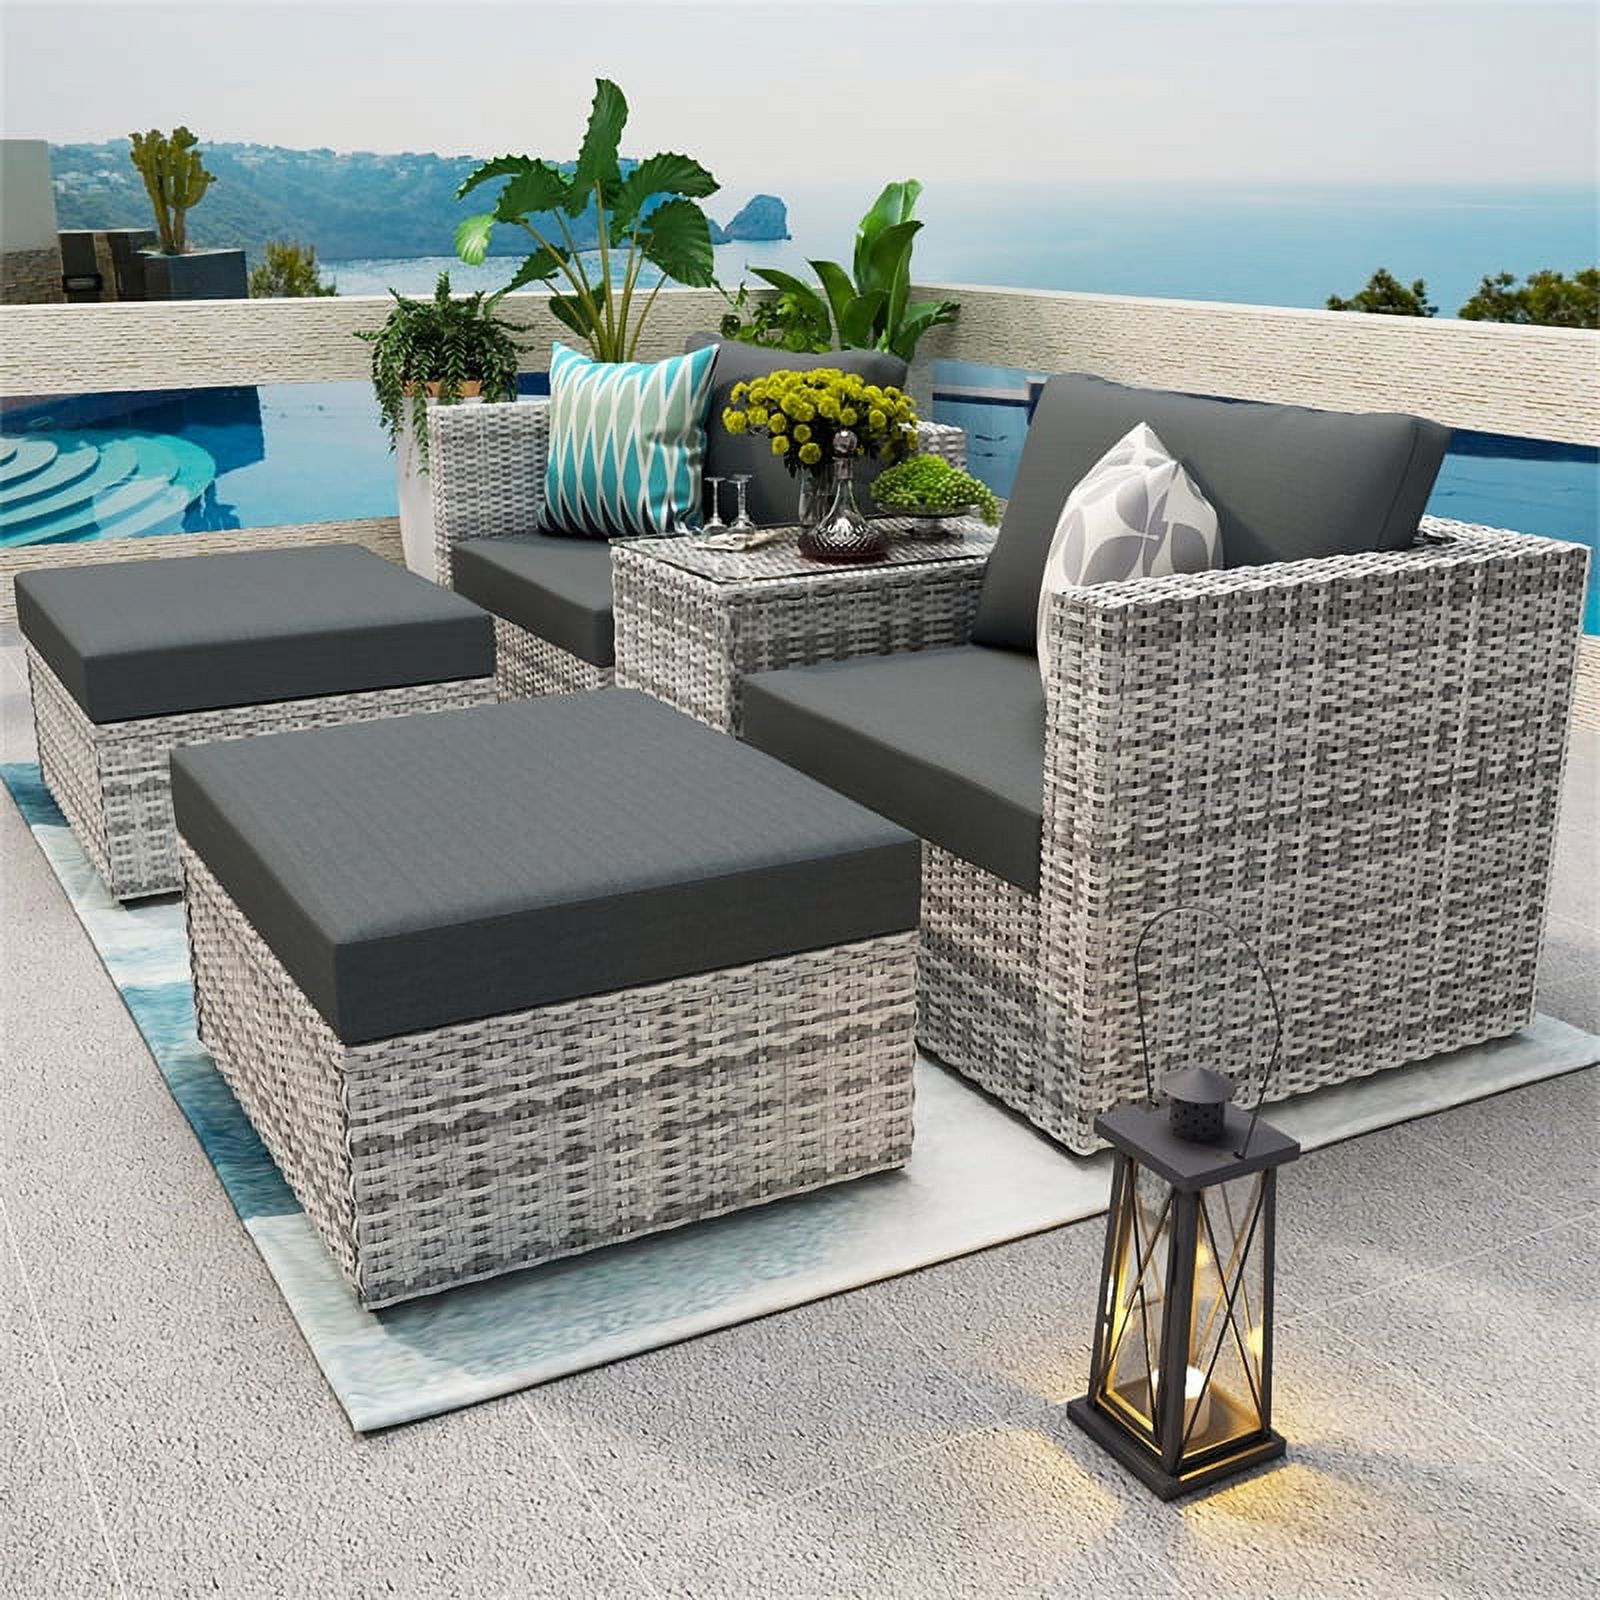 5 Pieces Outdoor Patio Sectional Sofa Set, Gray Rattan and Cushion with Weather Protecting Cover, Patio Sofa Sets with 2 Rattan Chairs, 2 Pieces Patio Rattan Ottomans and Coffee Table - image 2 of 7